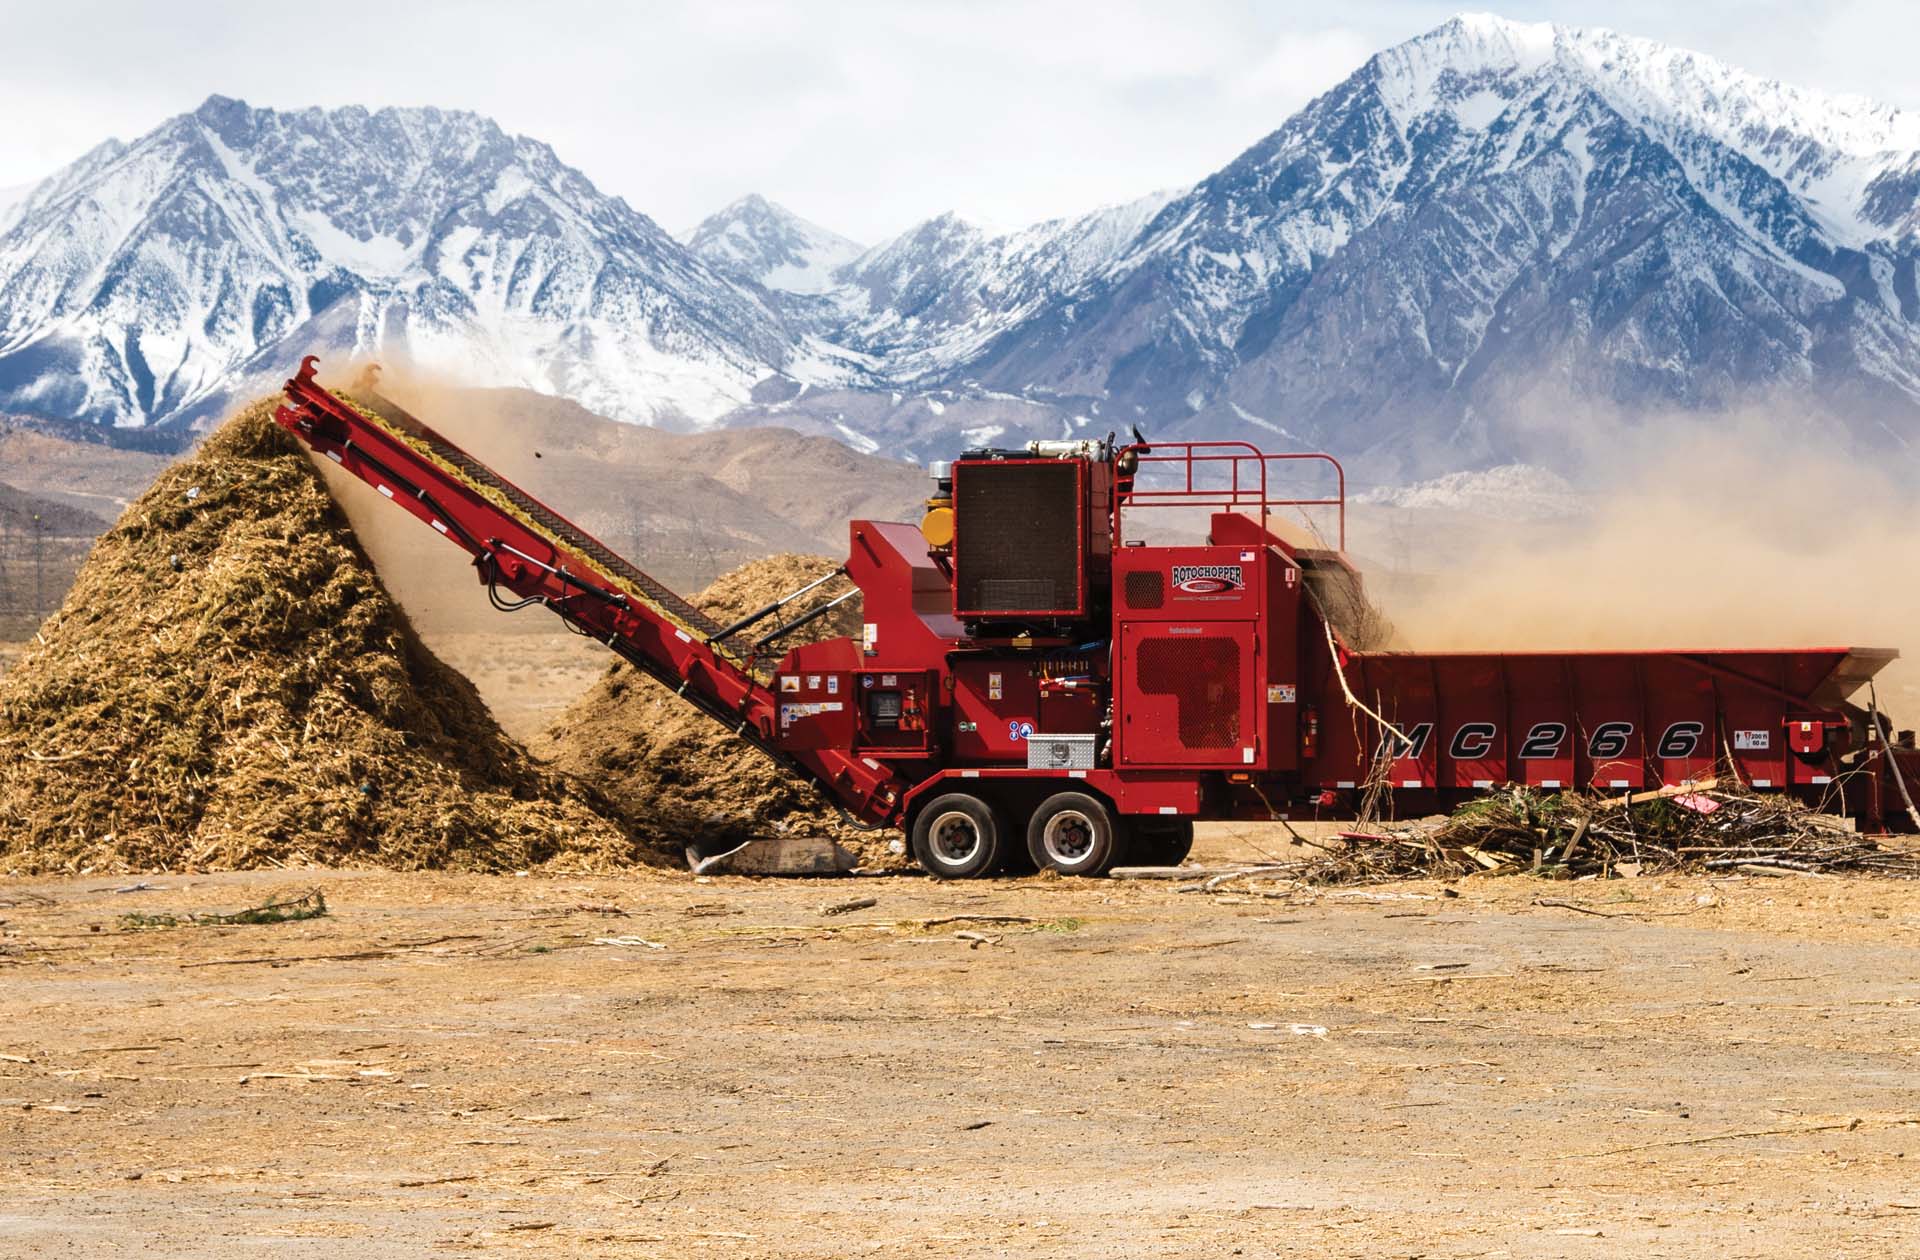 Rotochopper equipment on a job site with mountains in background